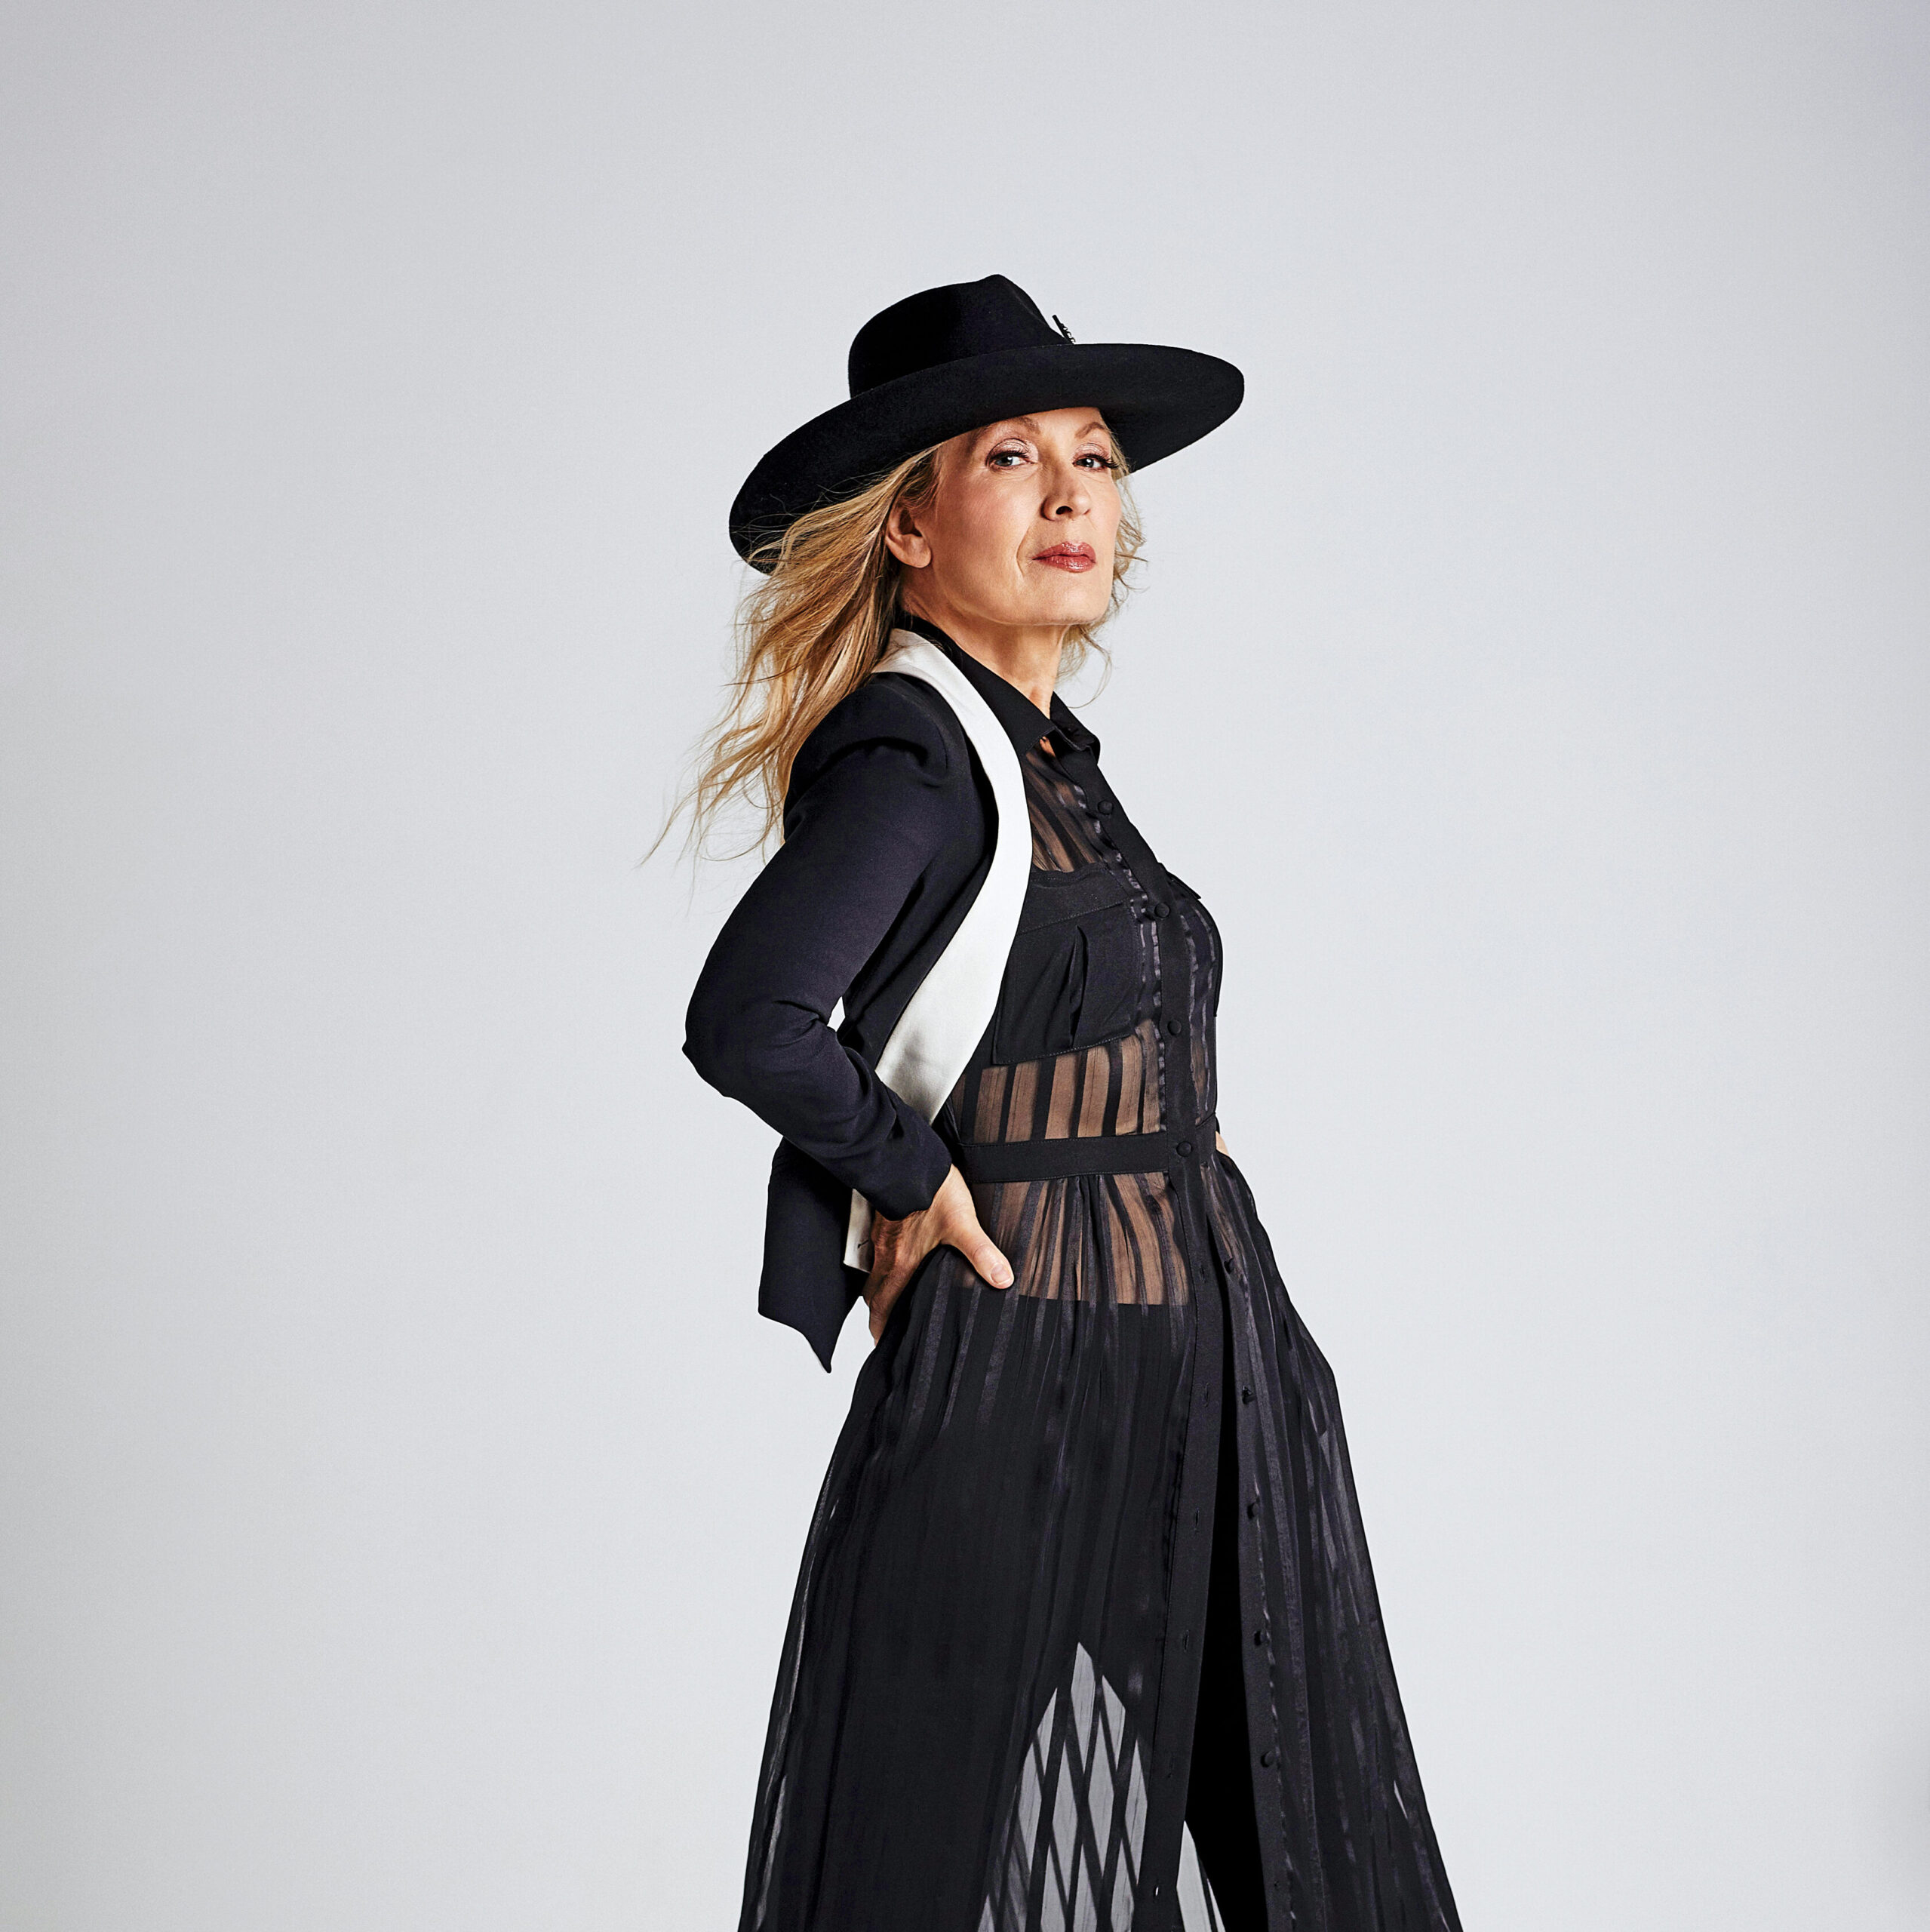 blonde woman wearing a black wide brimmed hat and a black striped mesh dress